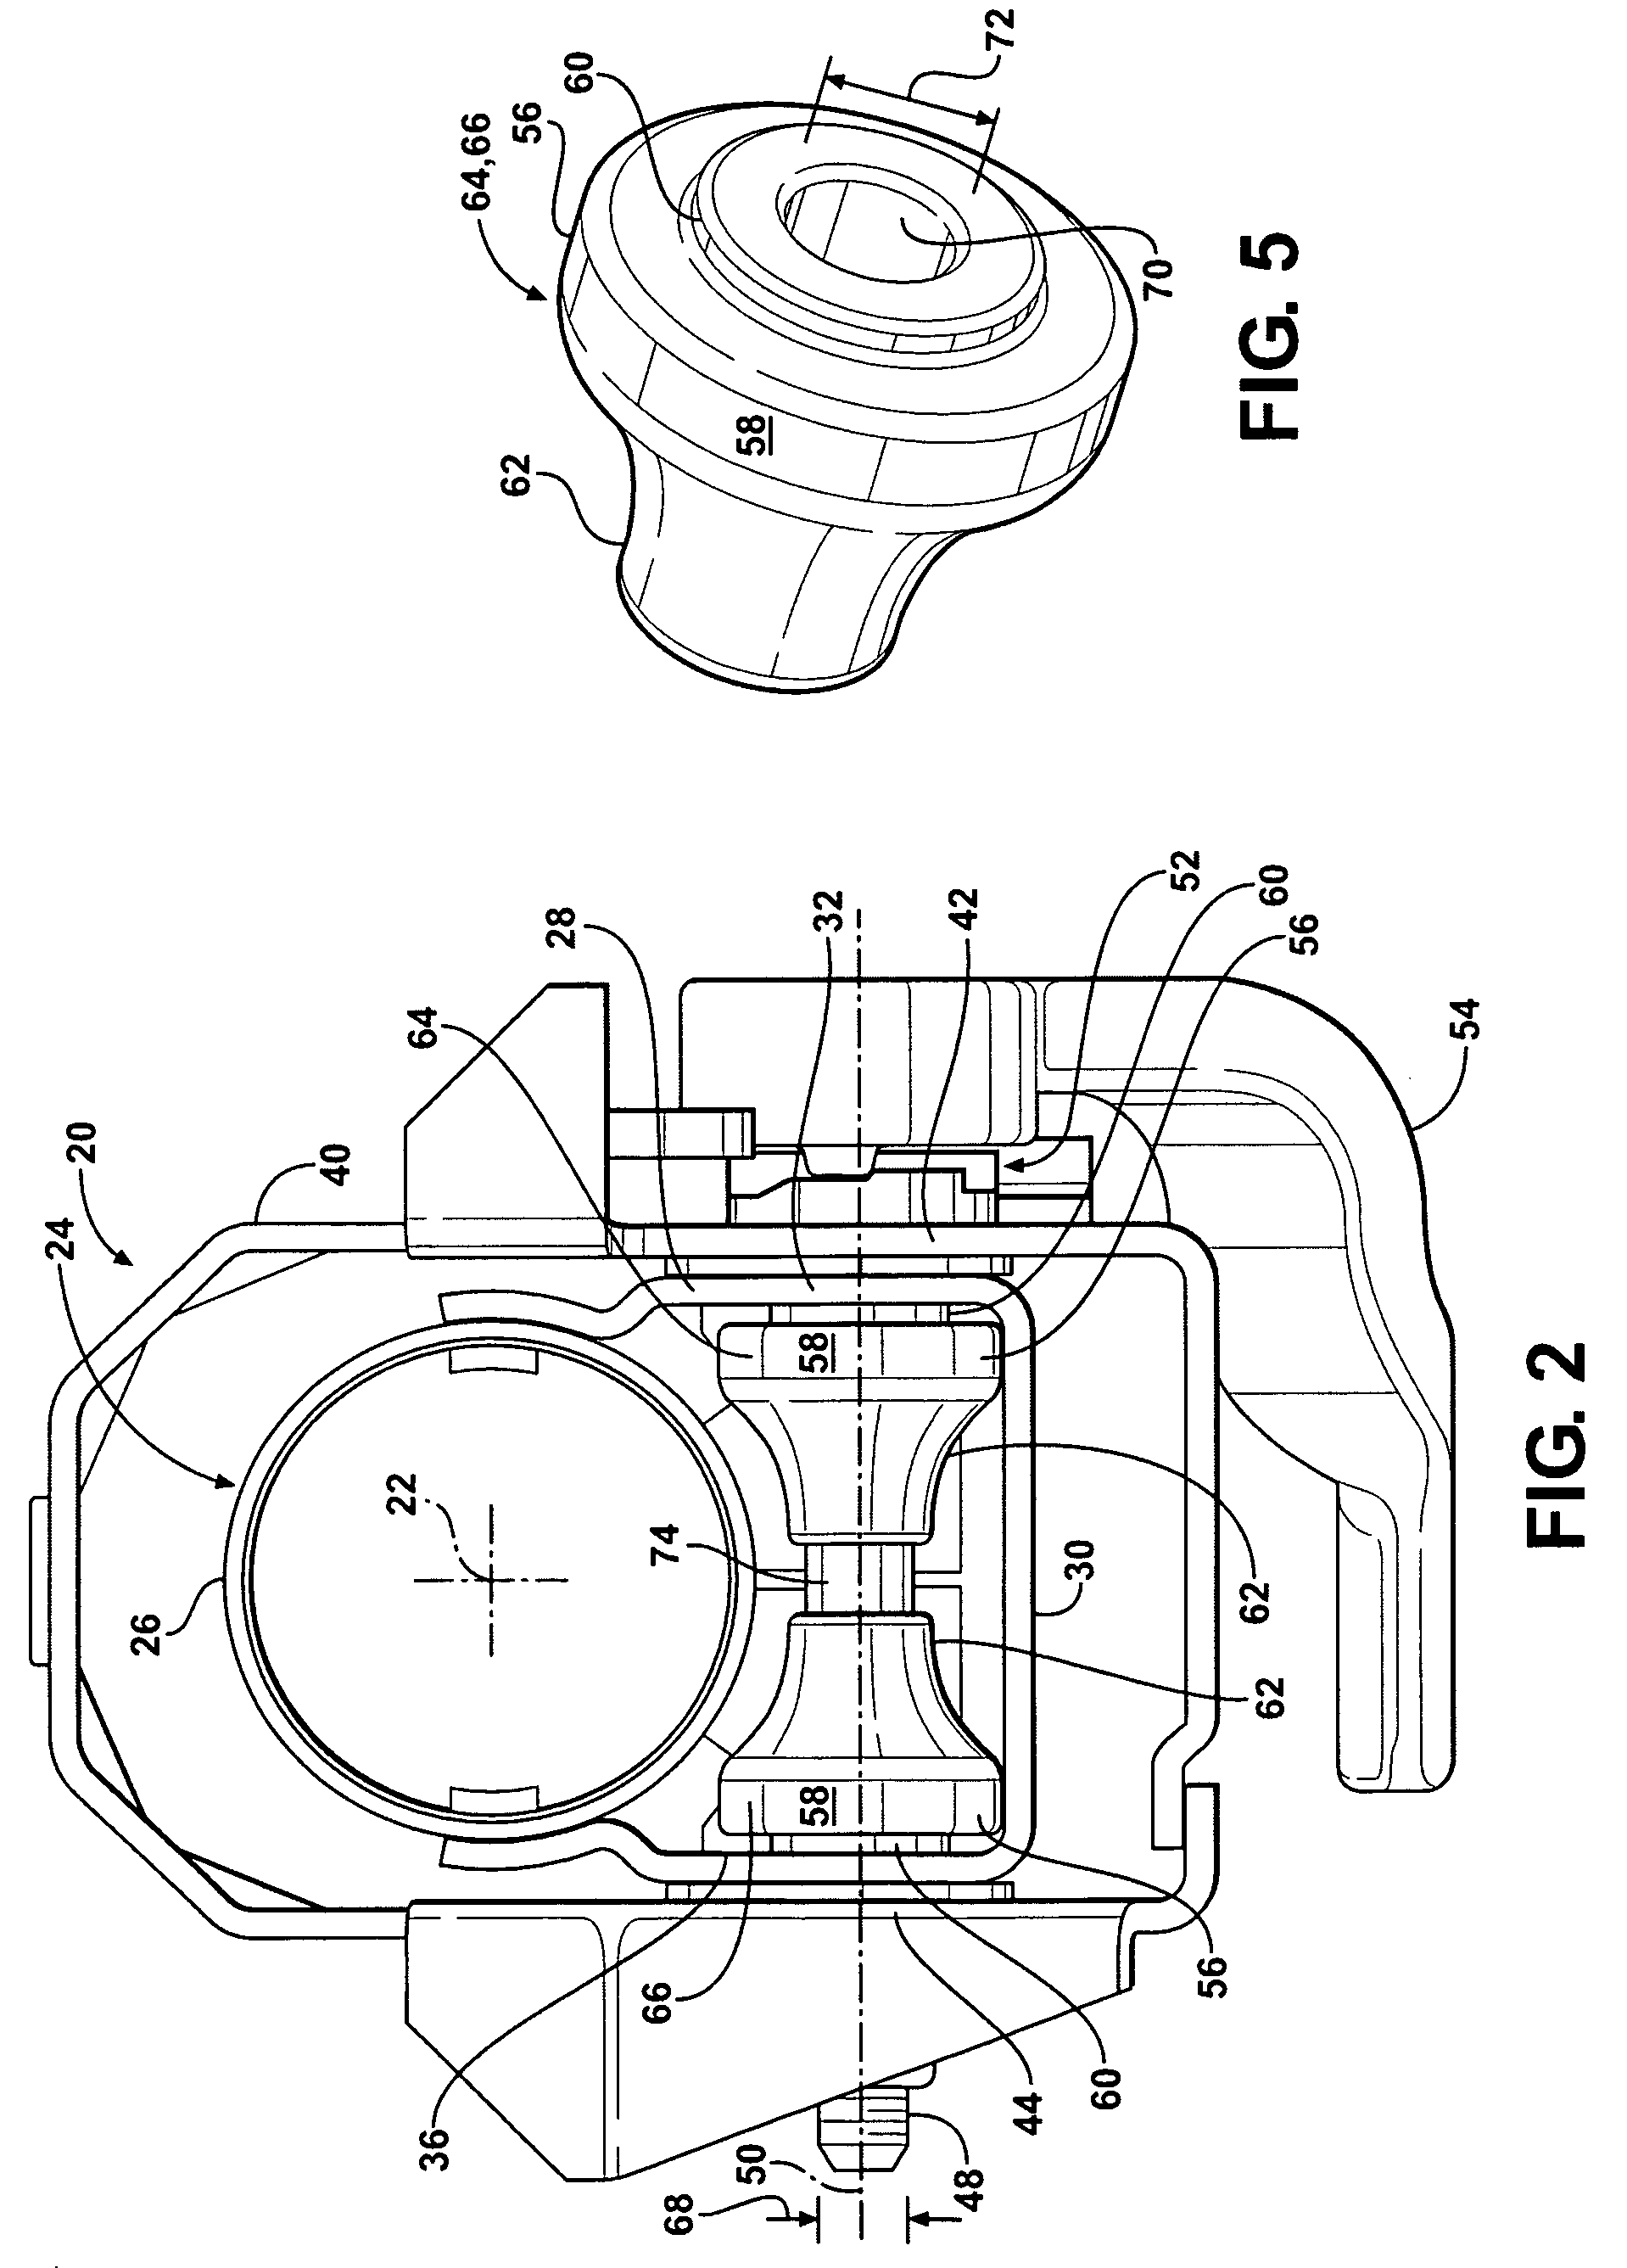 Steering column assembly having rollers to reduce friction during column collapse